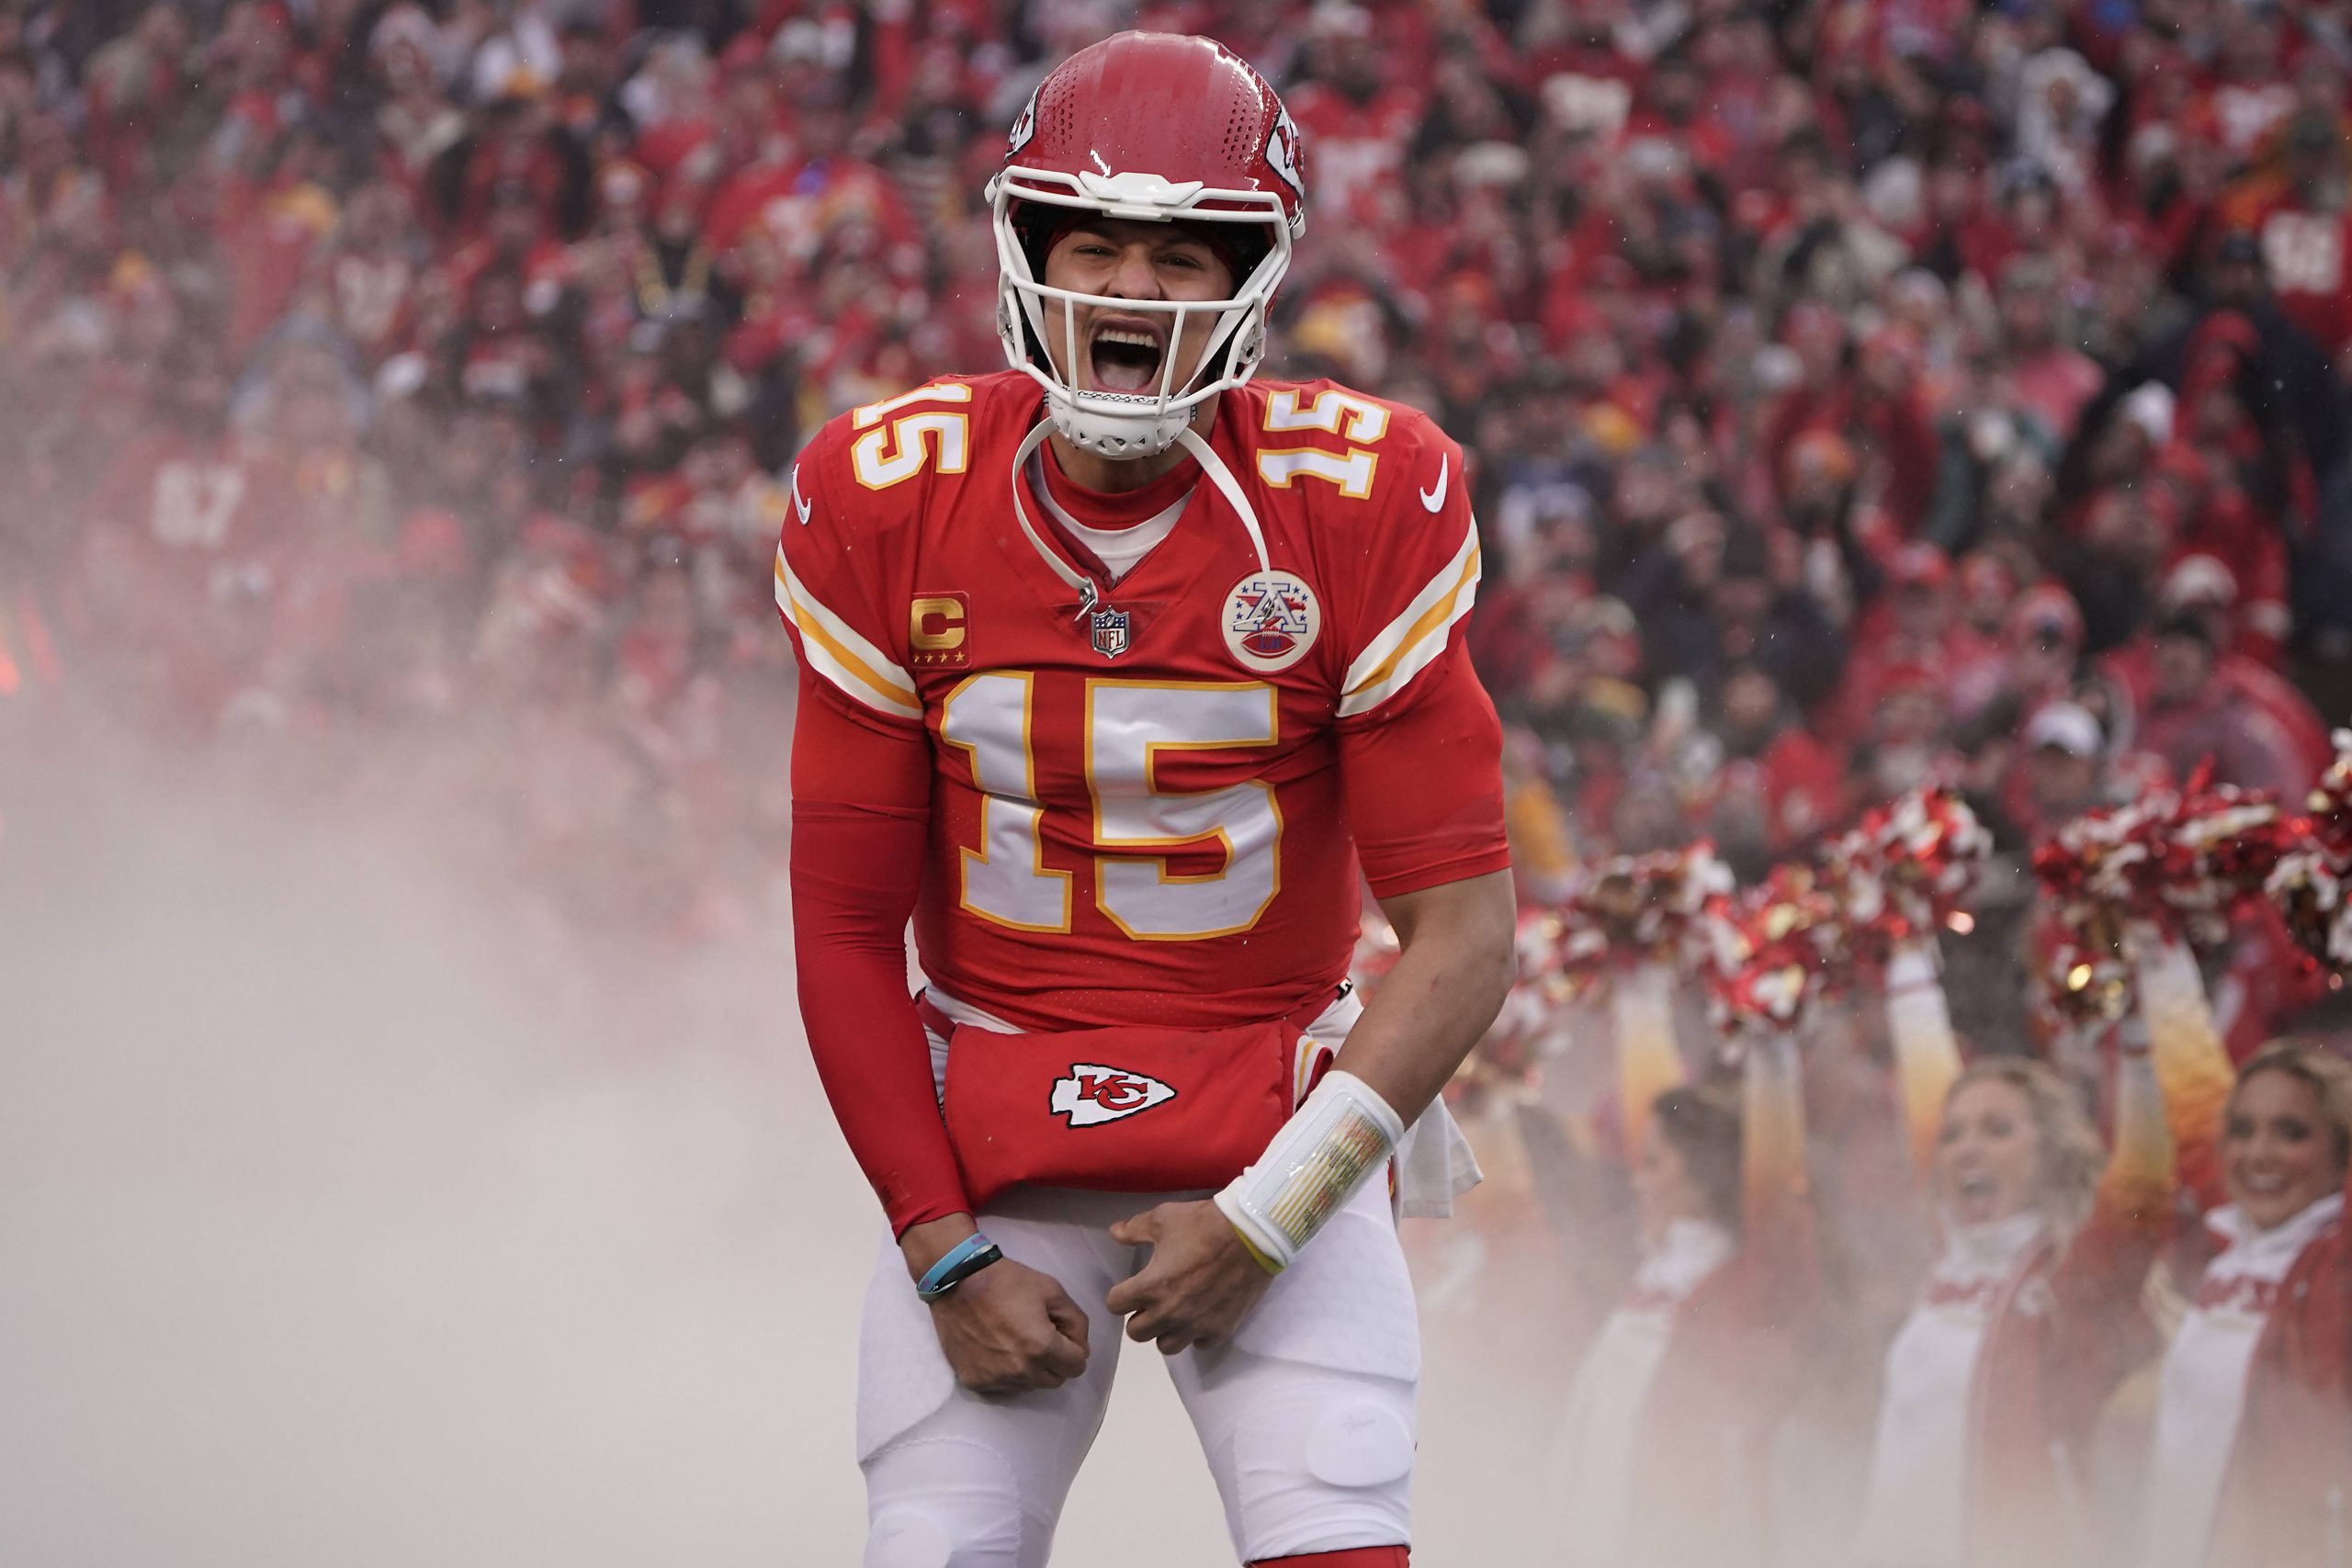 NFL, American Football Herren, USA AFC Divisional Round-Jacksonville Jaguars at Kansas City Chiefs Jan 21, 2023 Kansas City, Missouri, USA Kansas City Chiefs quarterback Patrick Mahomes 15 is introduced before playing against the Jacksonville Jaguars in the AFC divisional round game at GEHA Field at Arrowhead Stadium. Kansas City GEHA Field at Arrowhead Stadium Missouri USA, EDITORIAL USE ONLY PUBLICATIONxINxGERxSUIxAUTxONLY Copyright: xDennyxMedleyx 20230121_gav_sm8_018